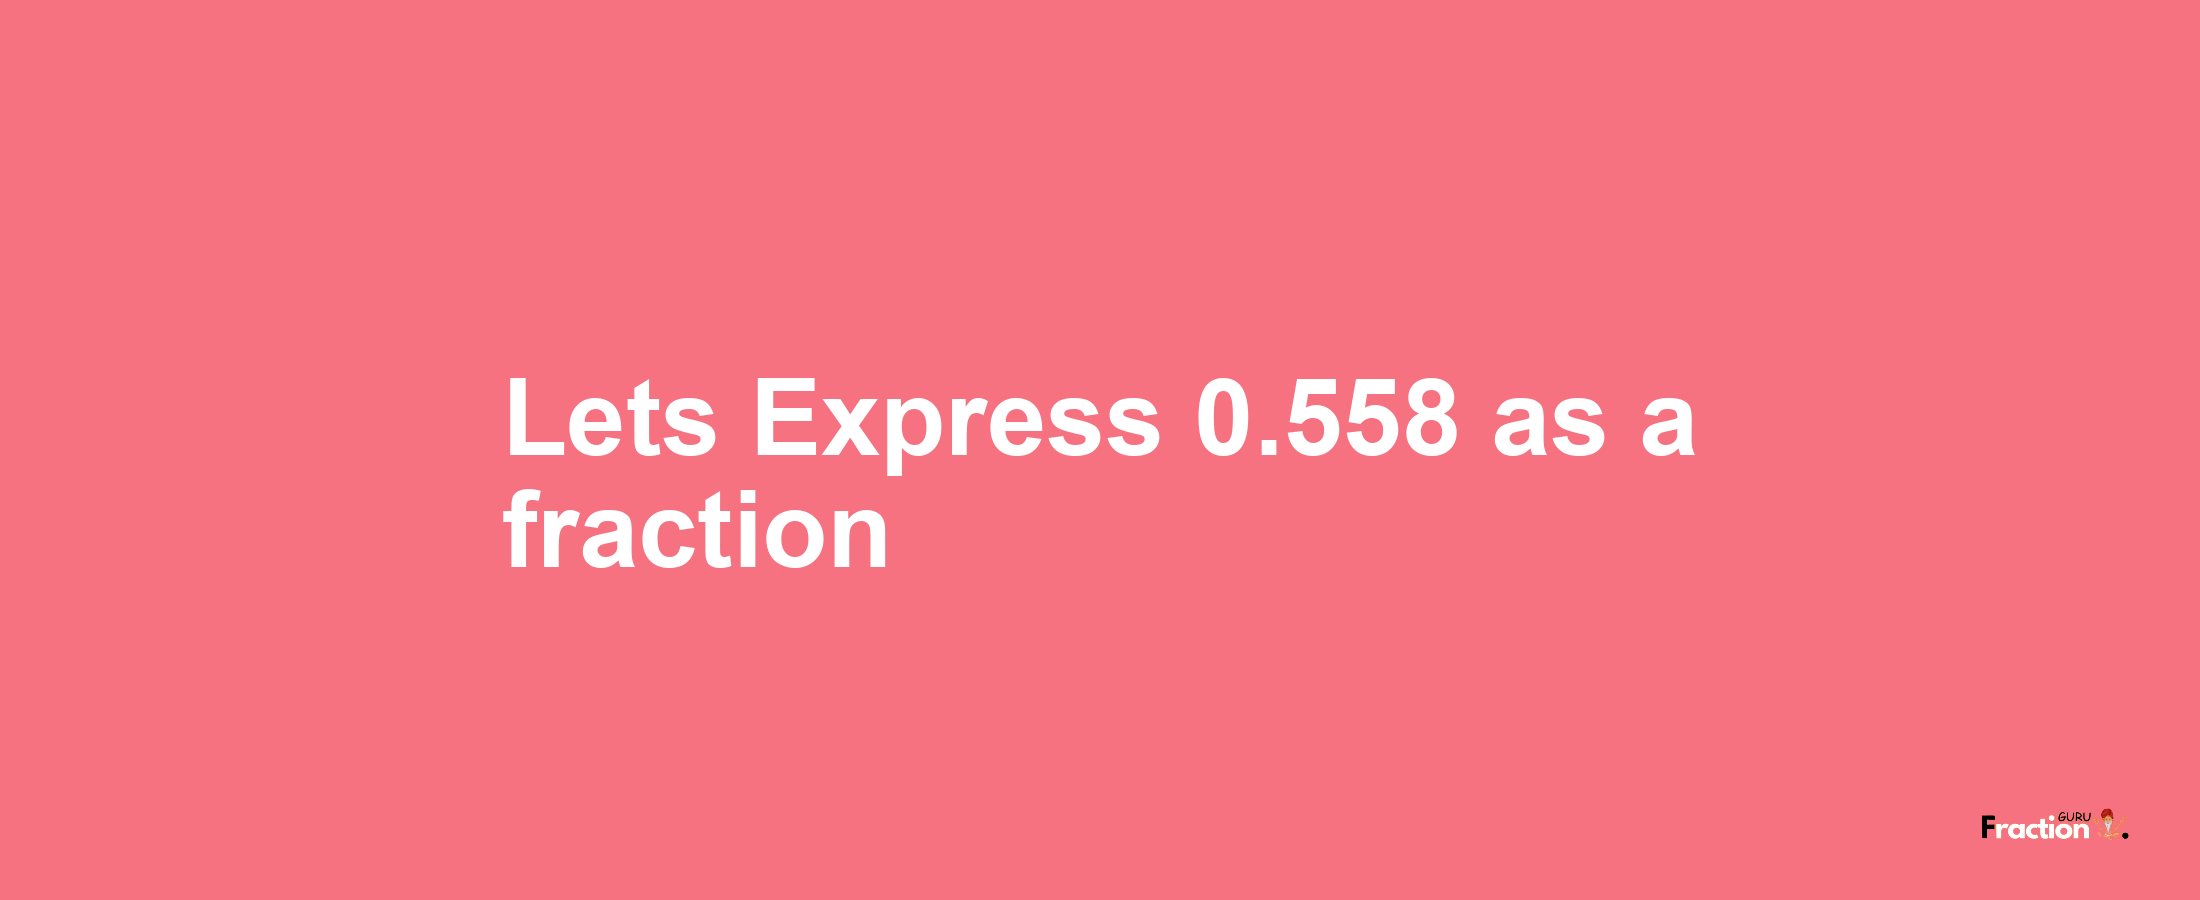 Lets Express 0.558 as afraction